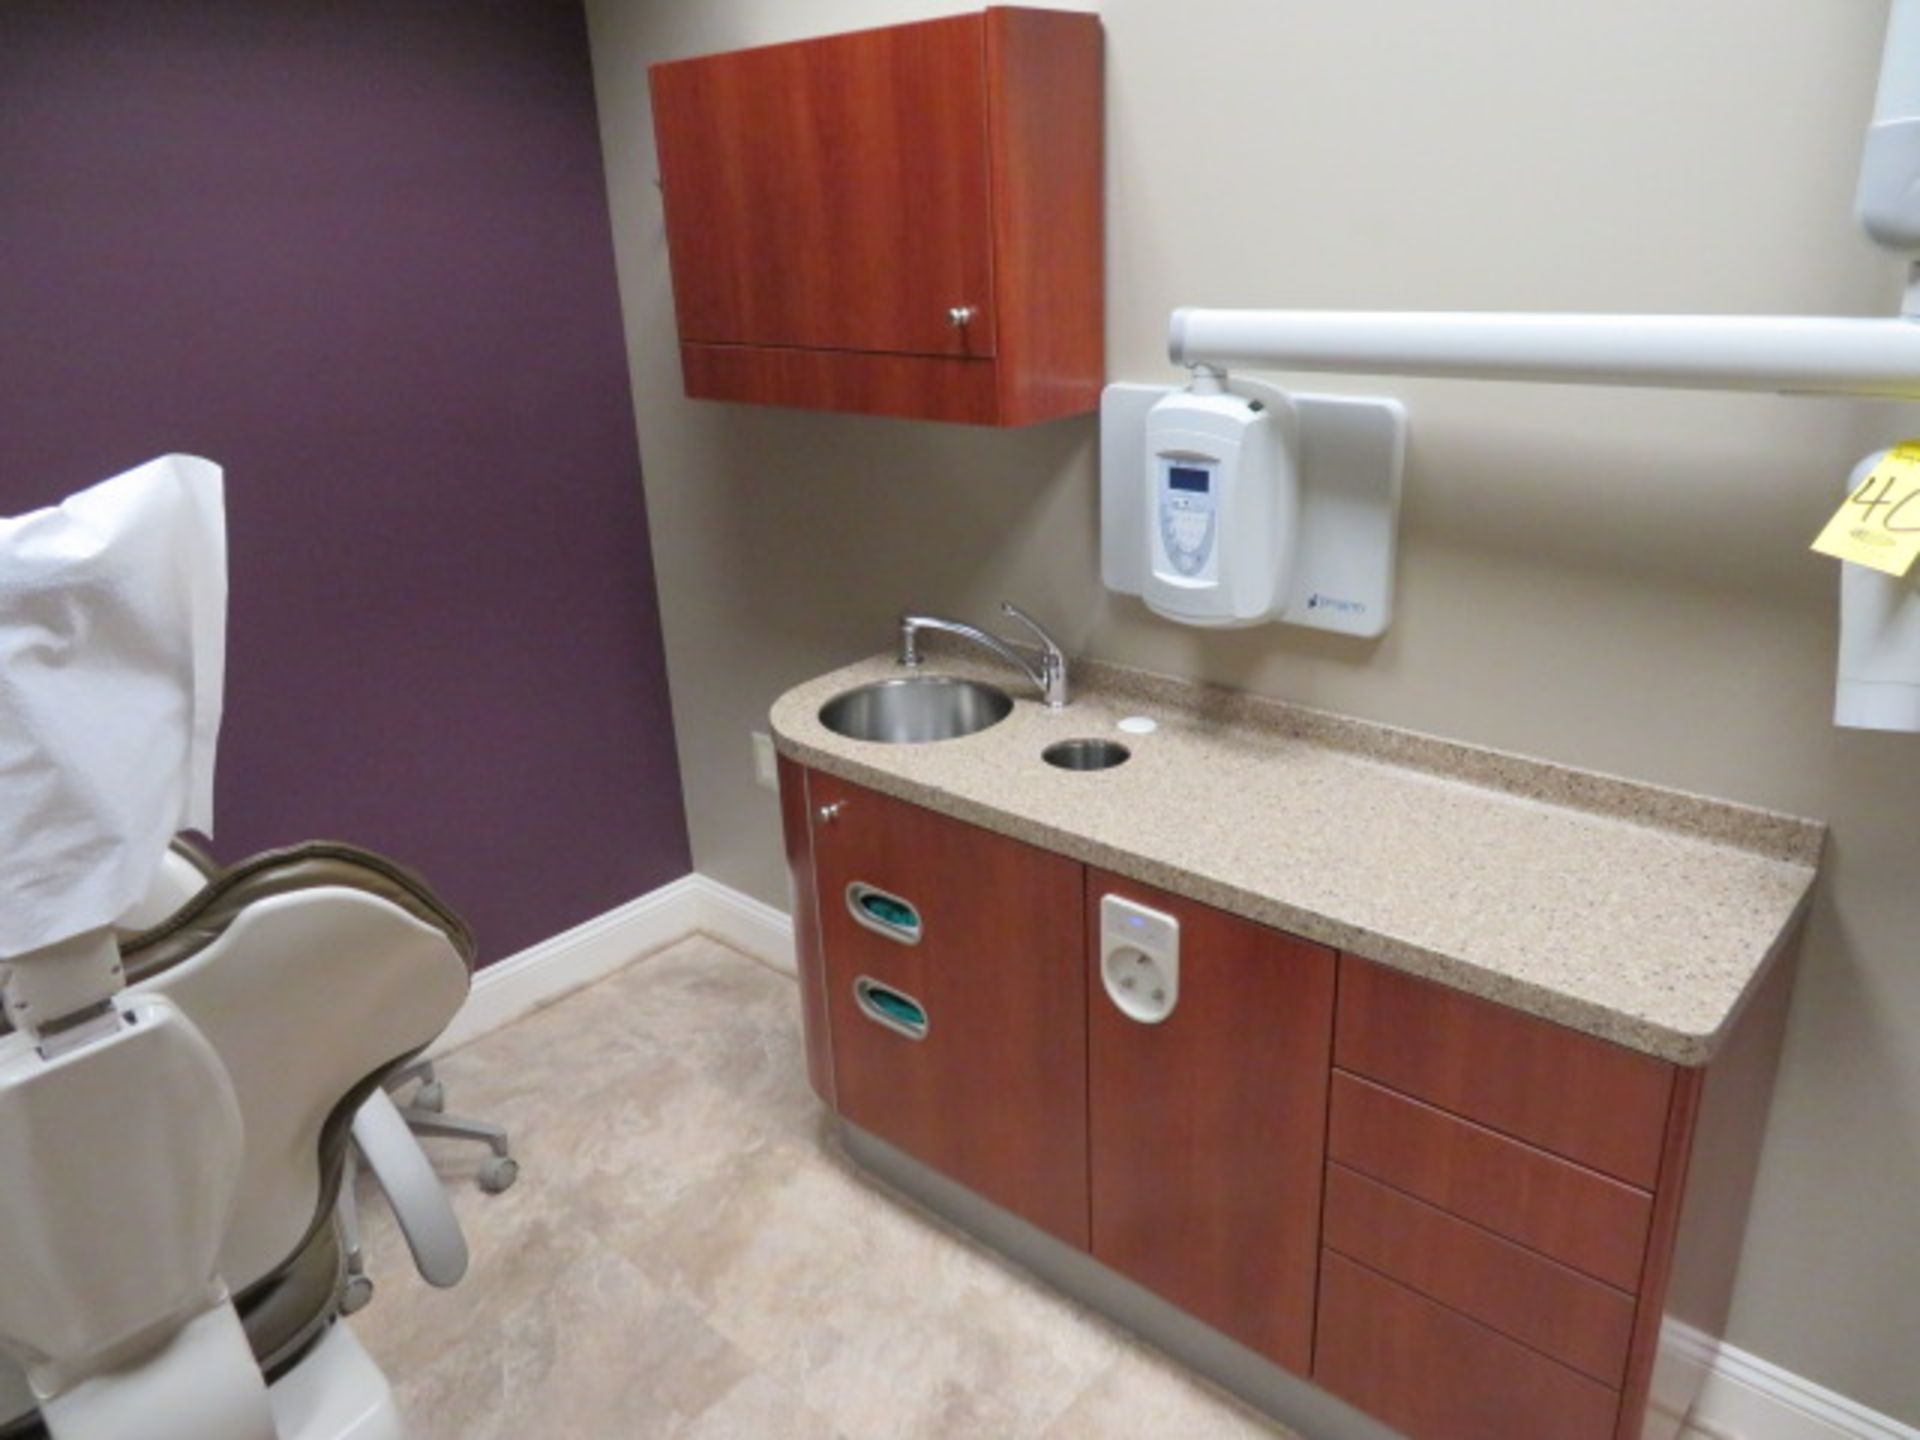 ADEC 511 SERIES DENTAL CHAIR, 541 DUO REAR-DELIVERY UNIT, 5580 CABINET, 5531/5730 SINK W/ CABINET - Image 3 of 4